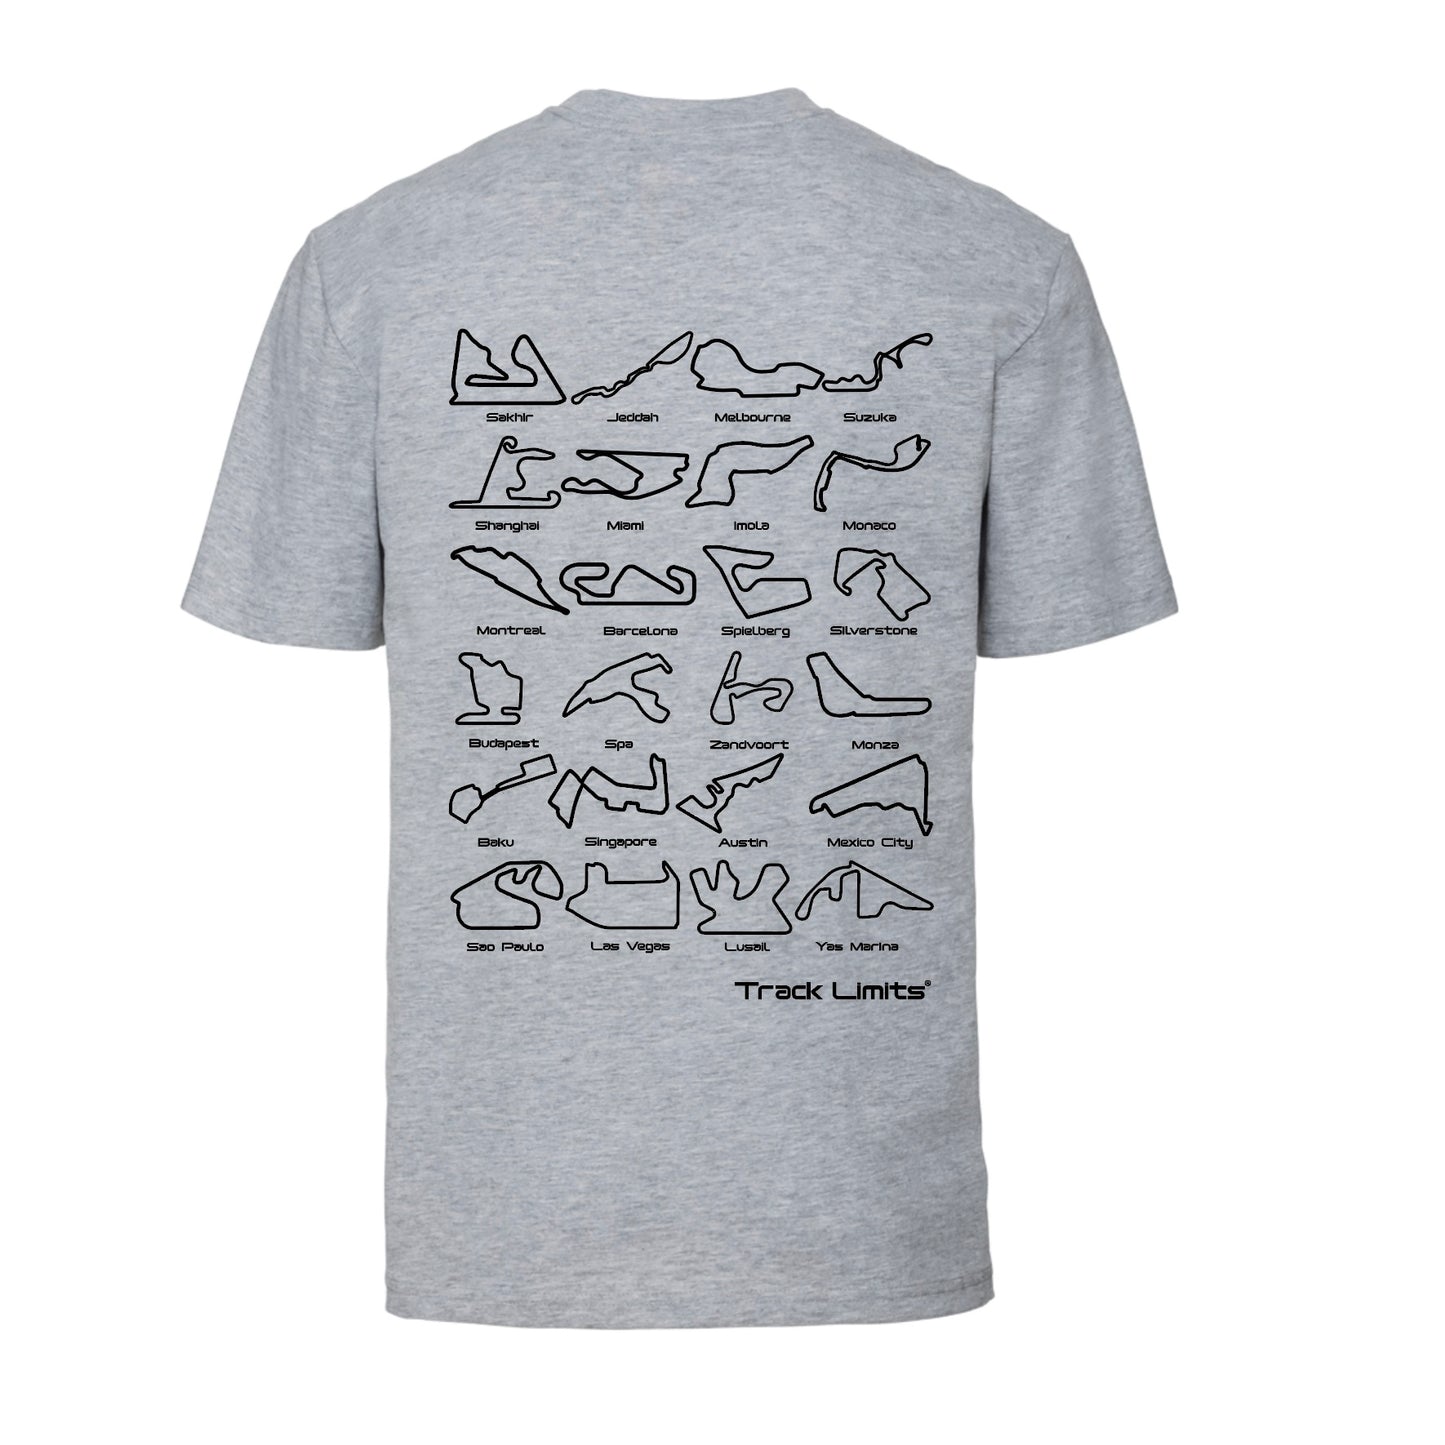 Track Limits T Shirt in grey. On the back is a design featuring 2023 F1 Formula One racetrack circuits and the Track Limits Logo.Front has the Track Limits logo to the left. Formula One Fan,Track Limits, Grand Prix,  Fathers Day, Dad, F1 fan gift